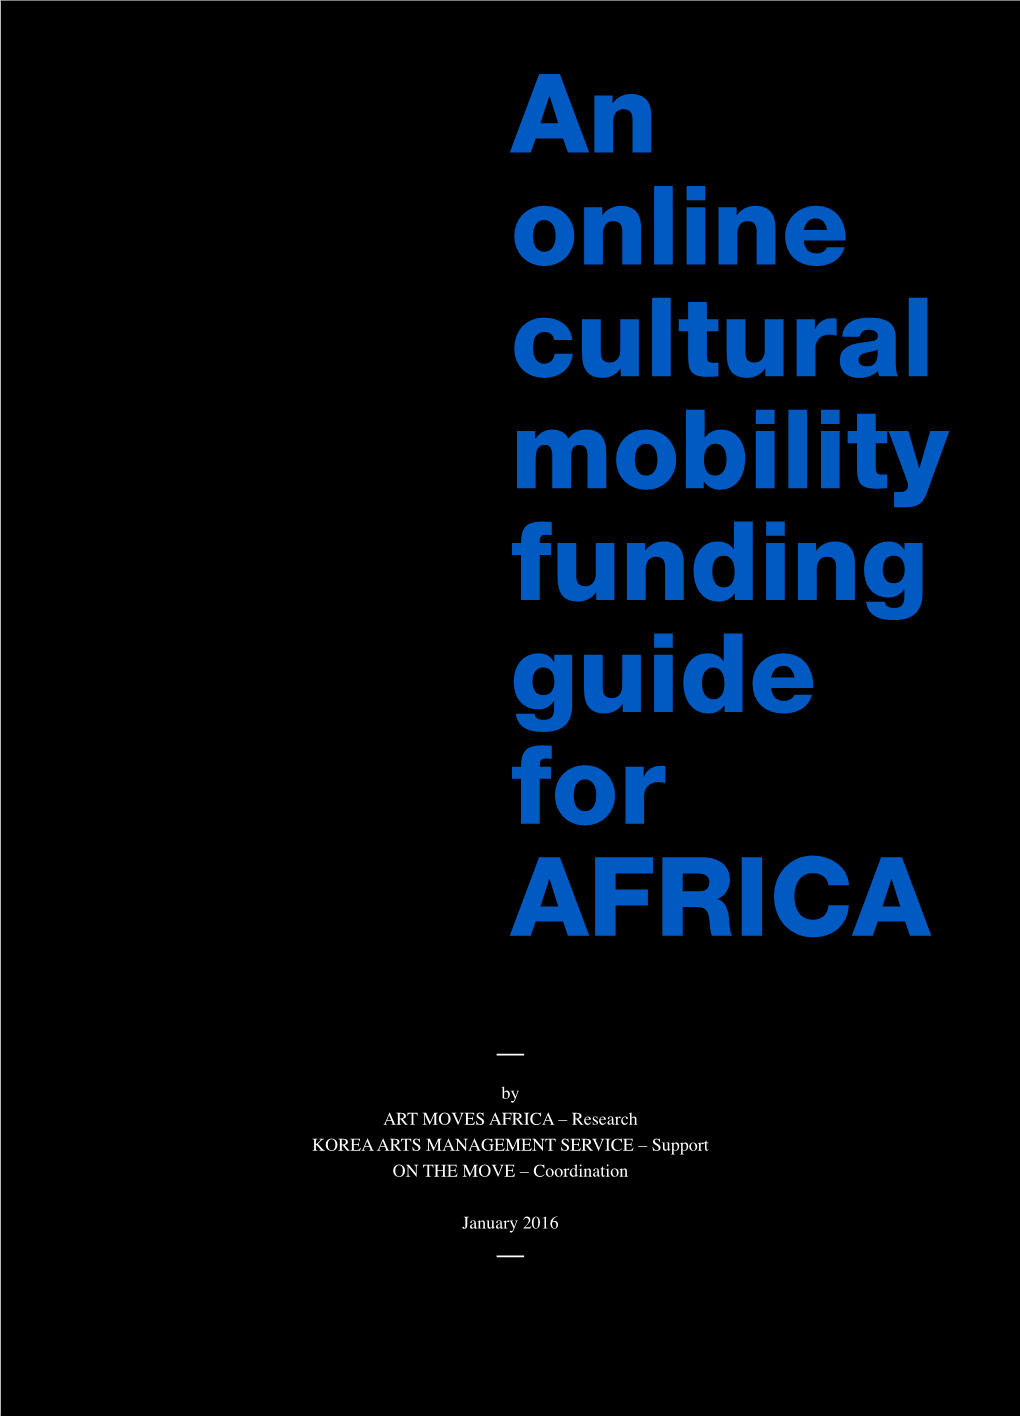 1An Online Cultural Mobility Funding Guide for AFRICA